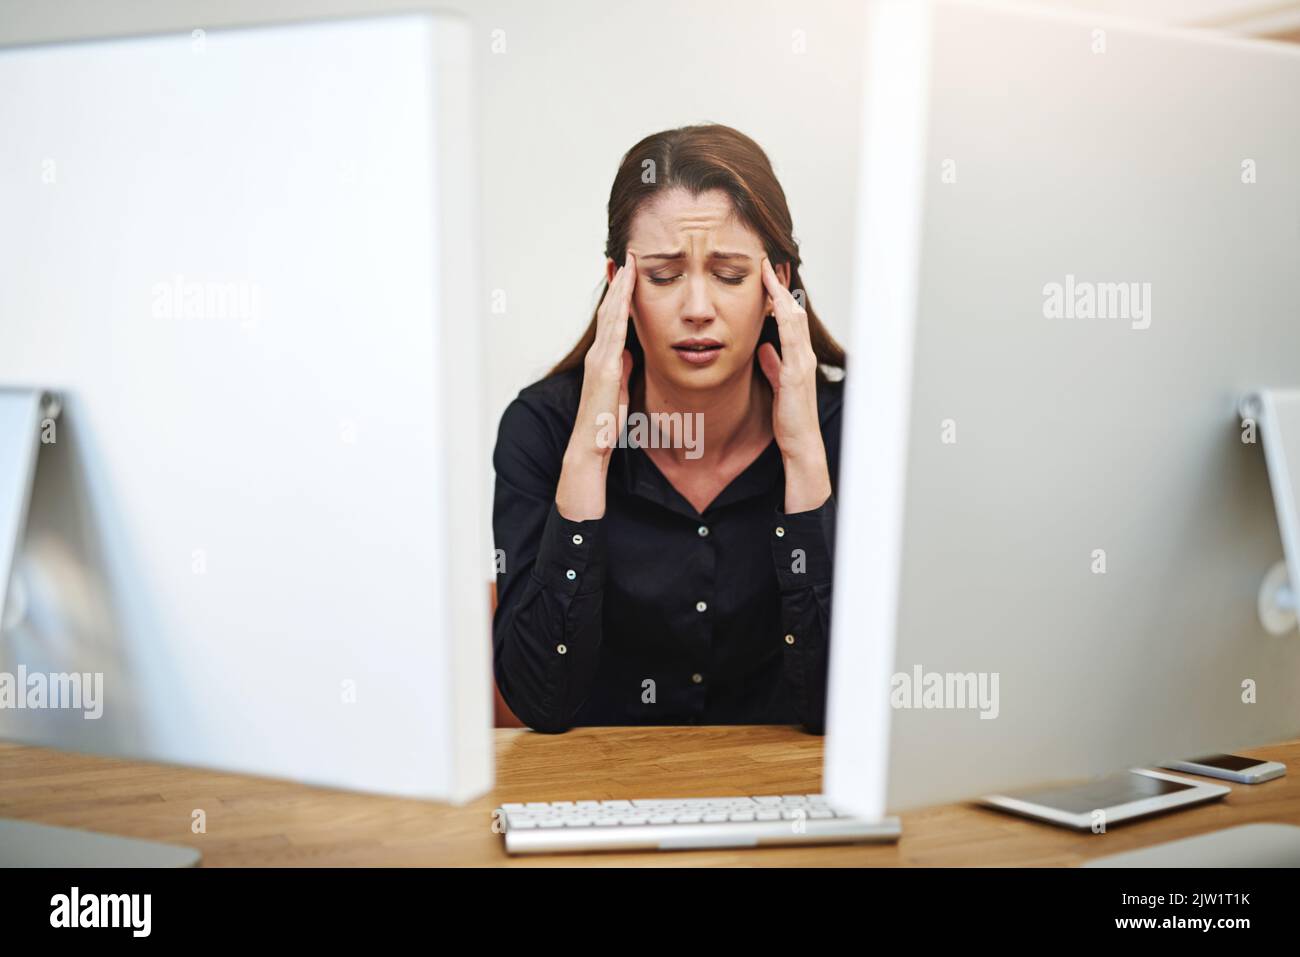 Works got her feeling frazzled. a young businesswoman having a bad day at work. Stock Photo